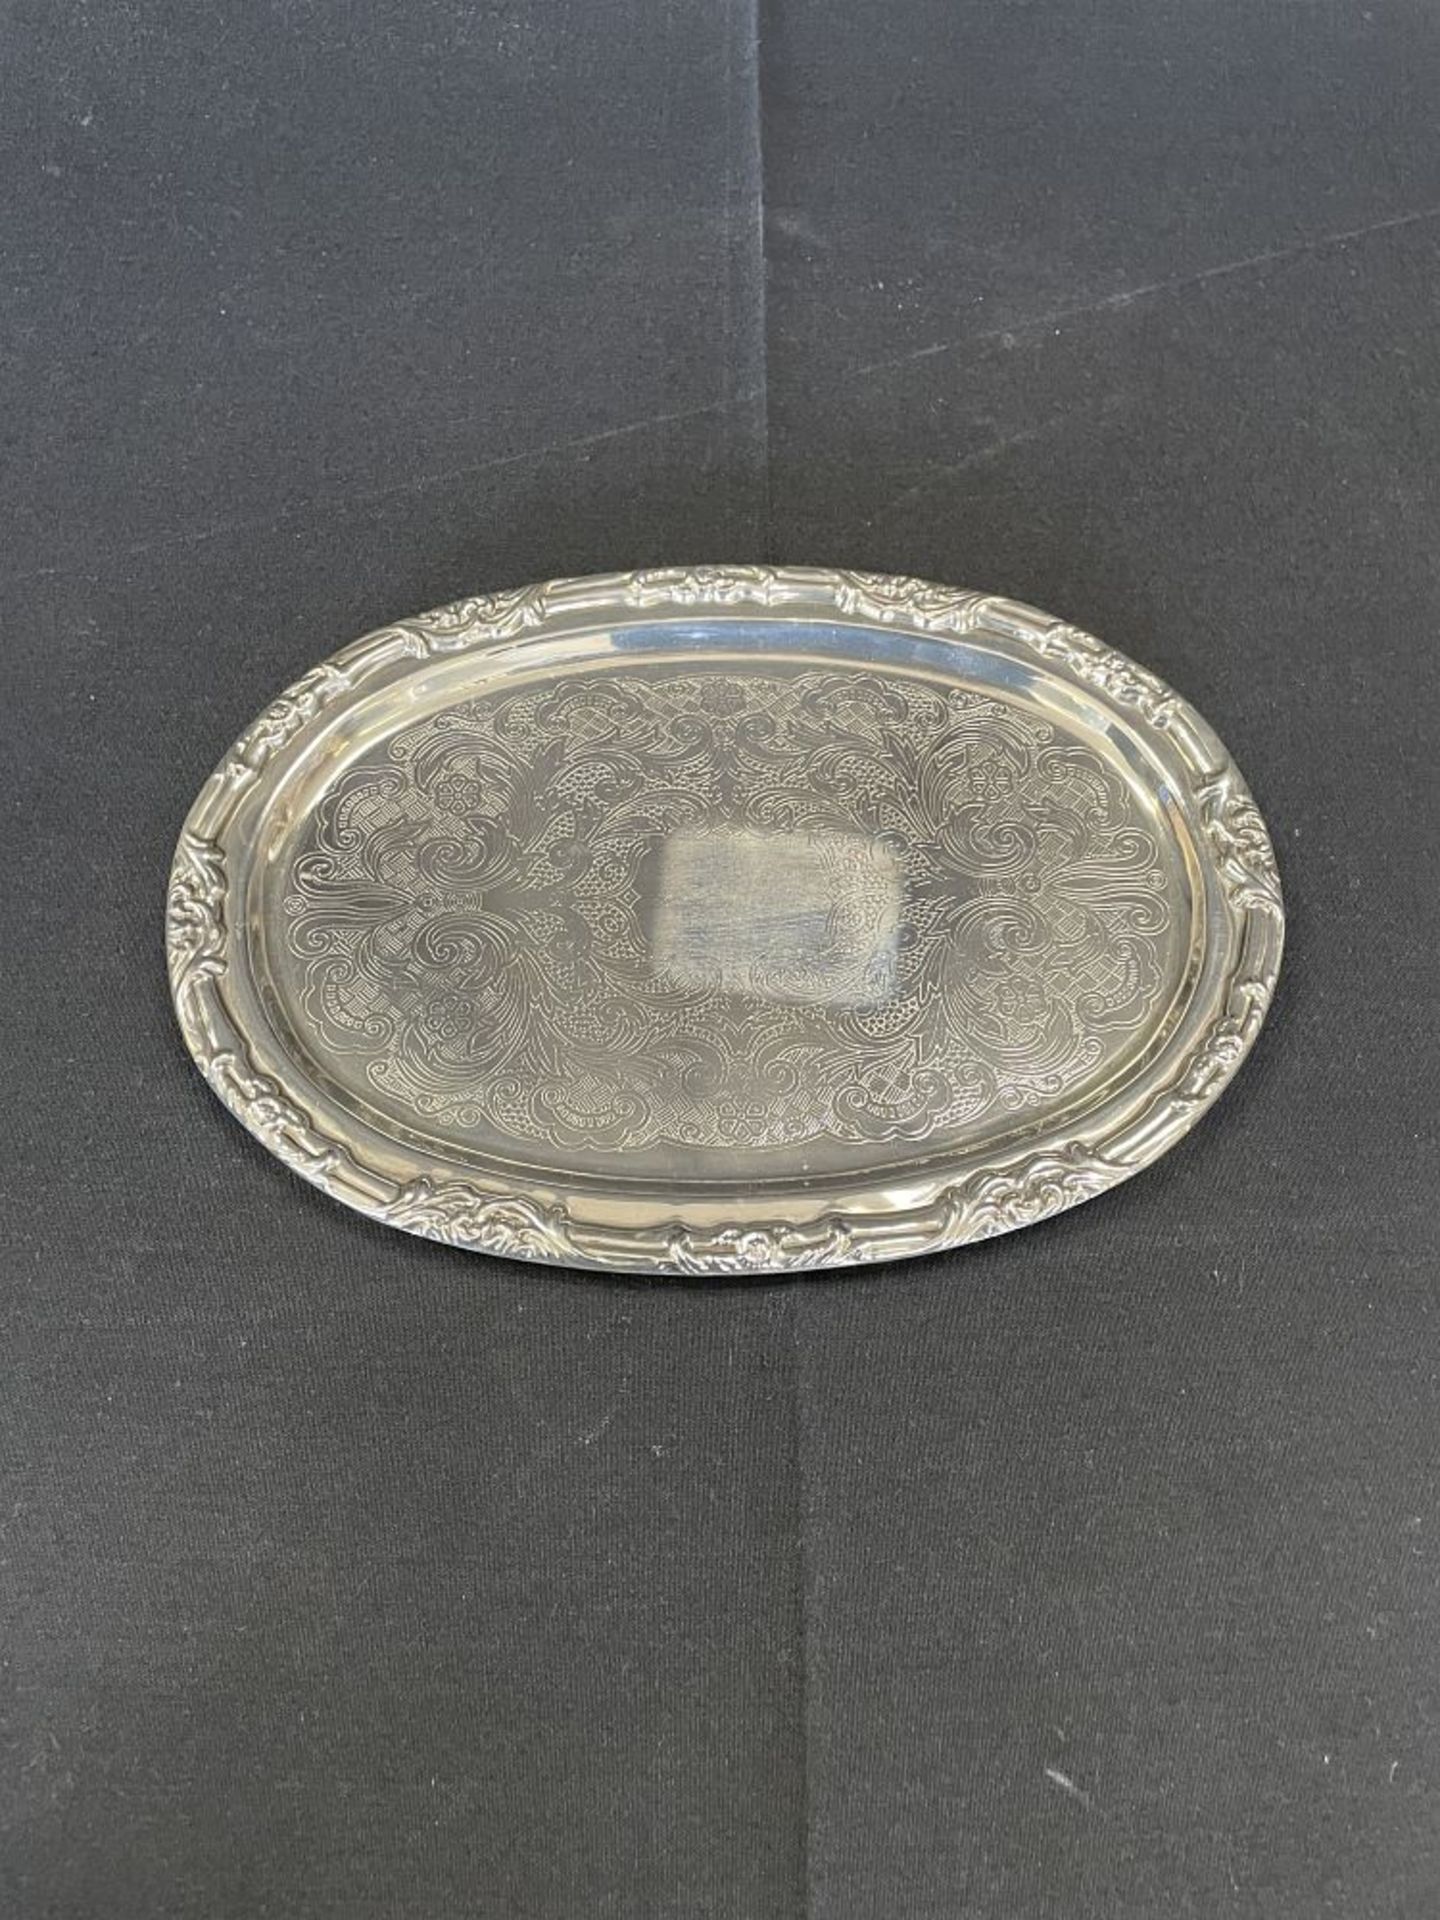 7"x9.5" Oval Silver Plate Serving Tray - Image 2 of 2